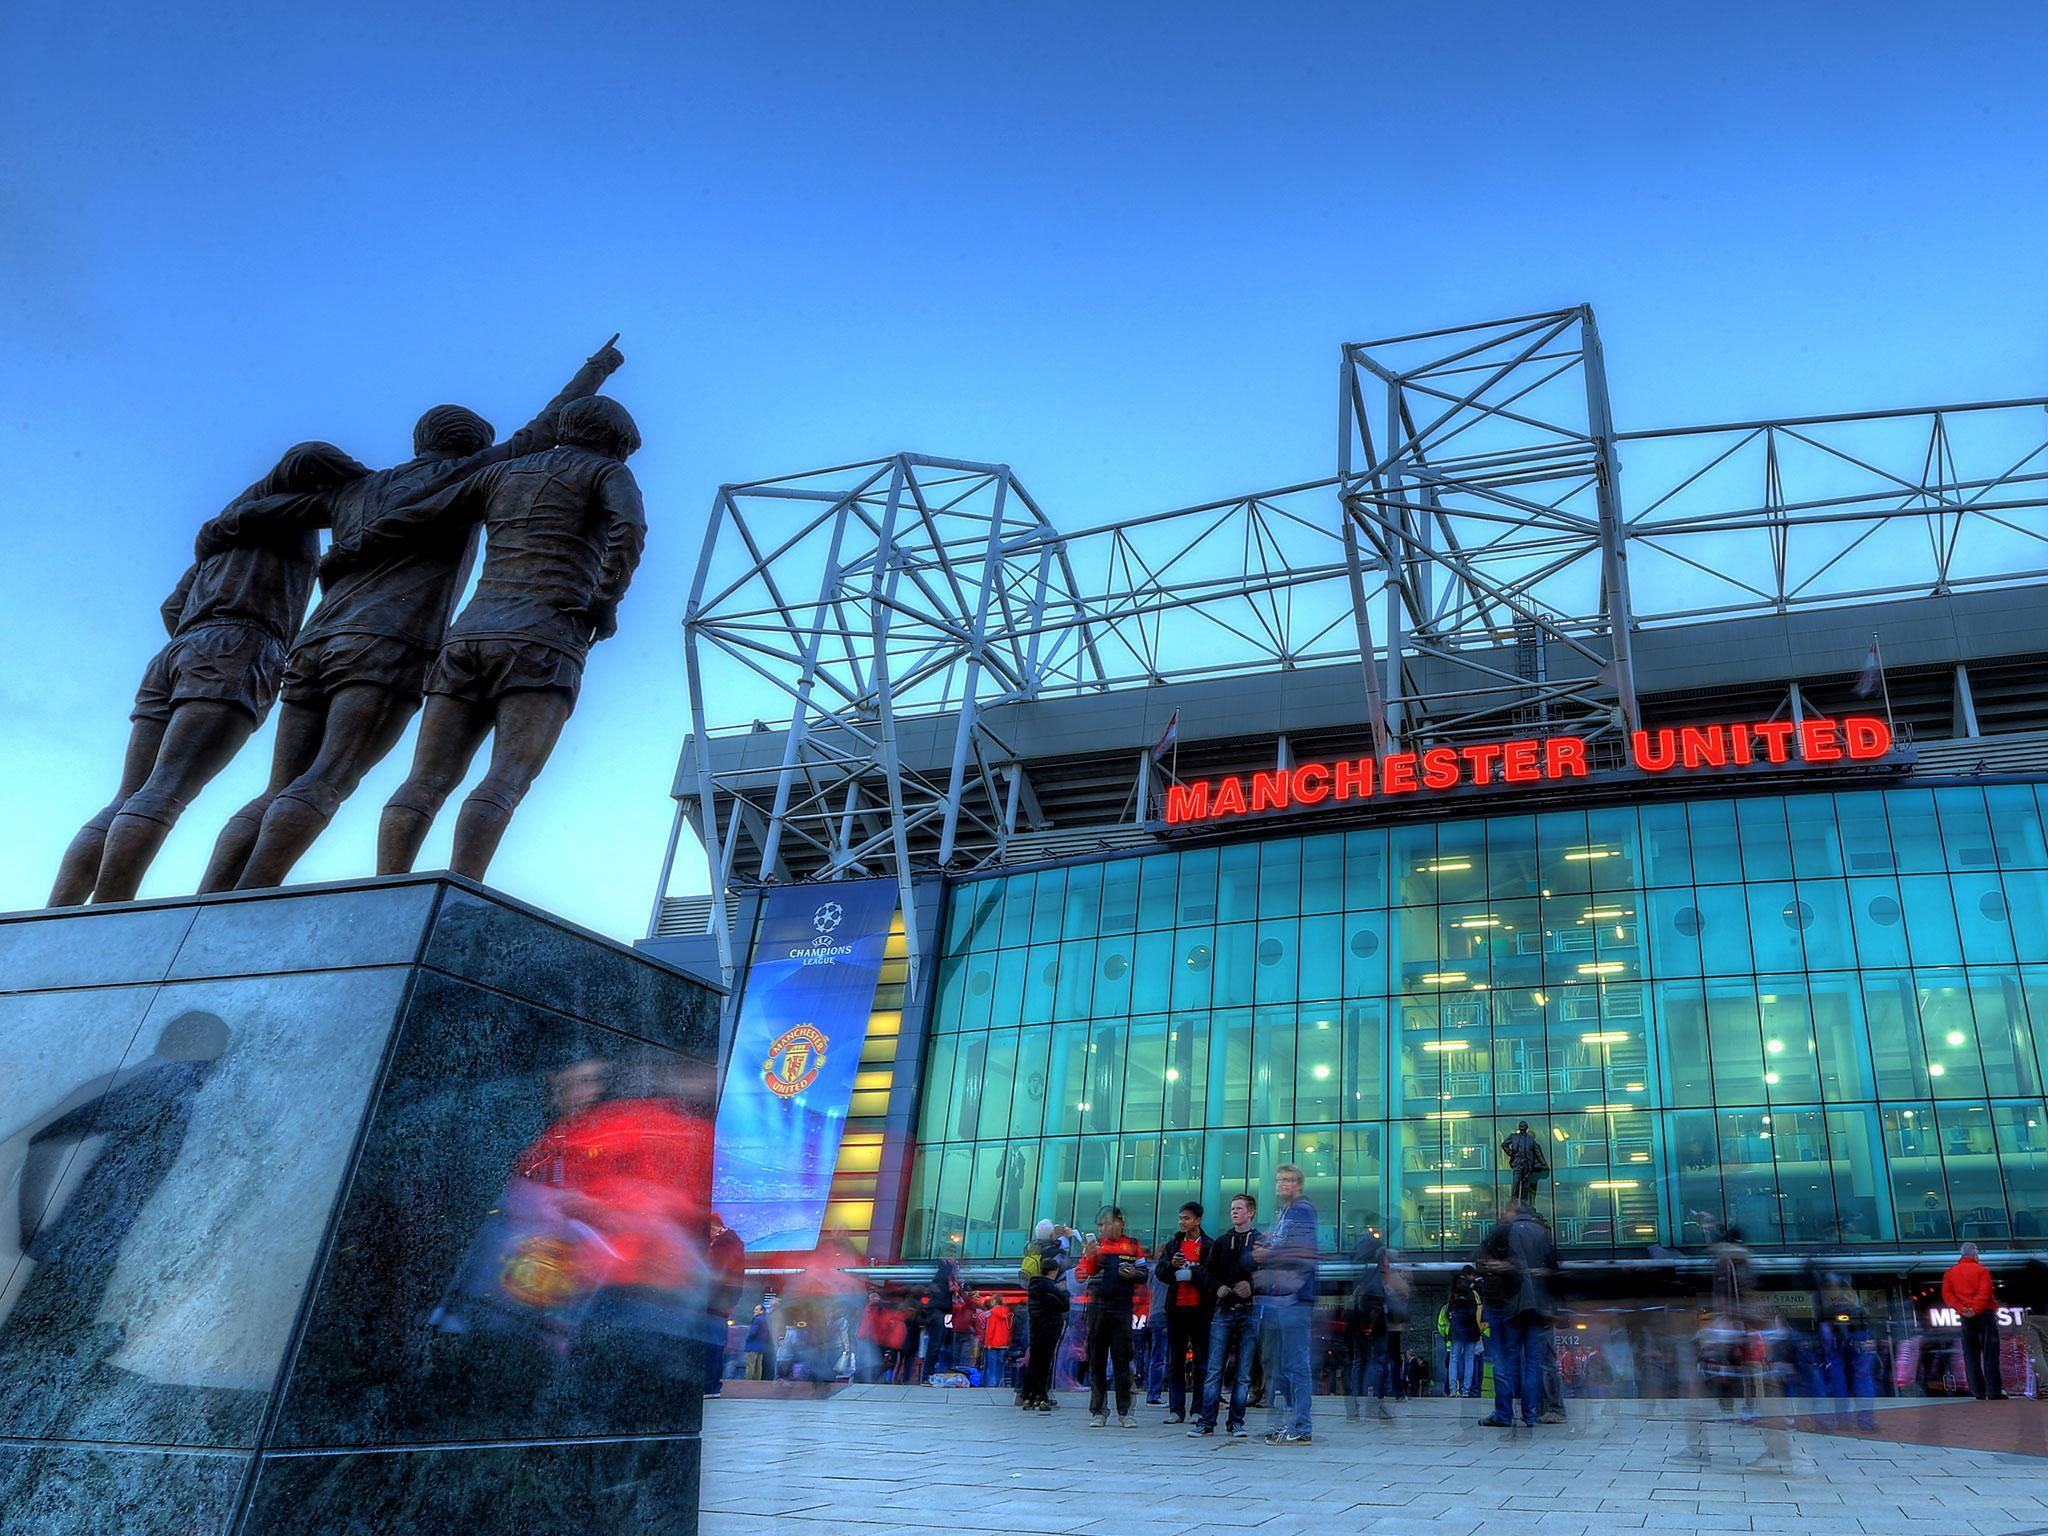 Old Trafford, the home ground of Manchester United